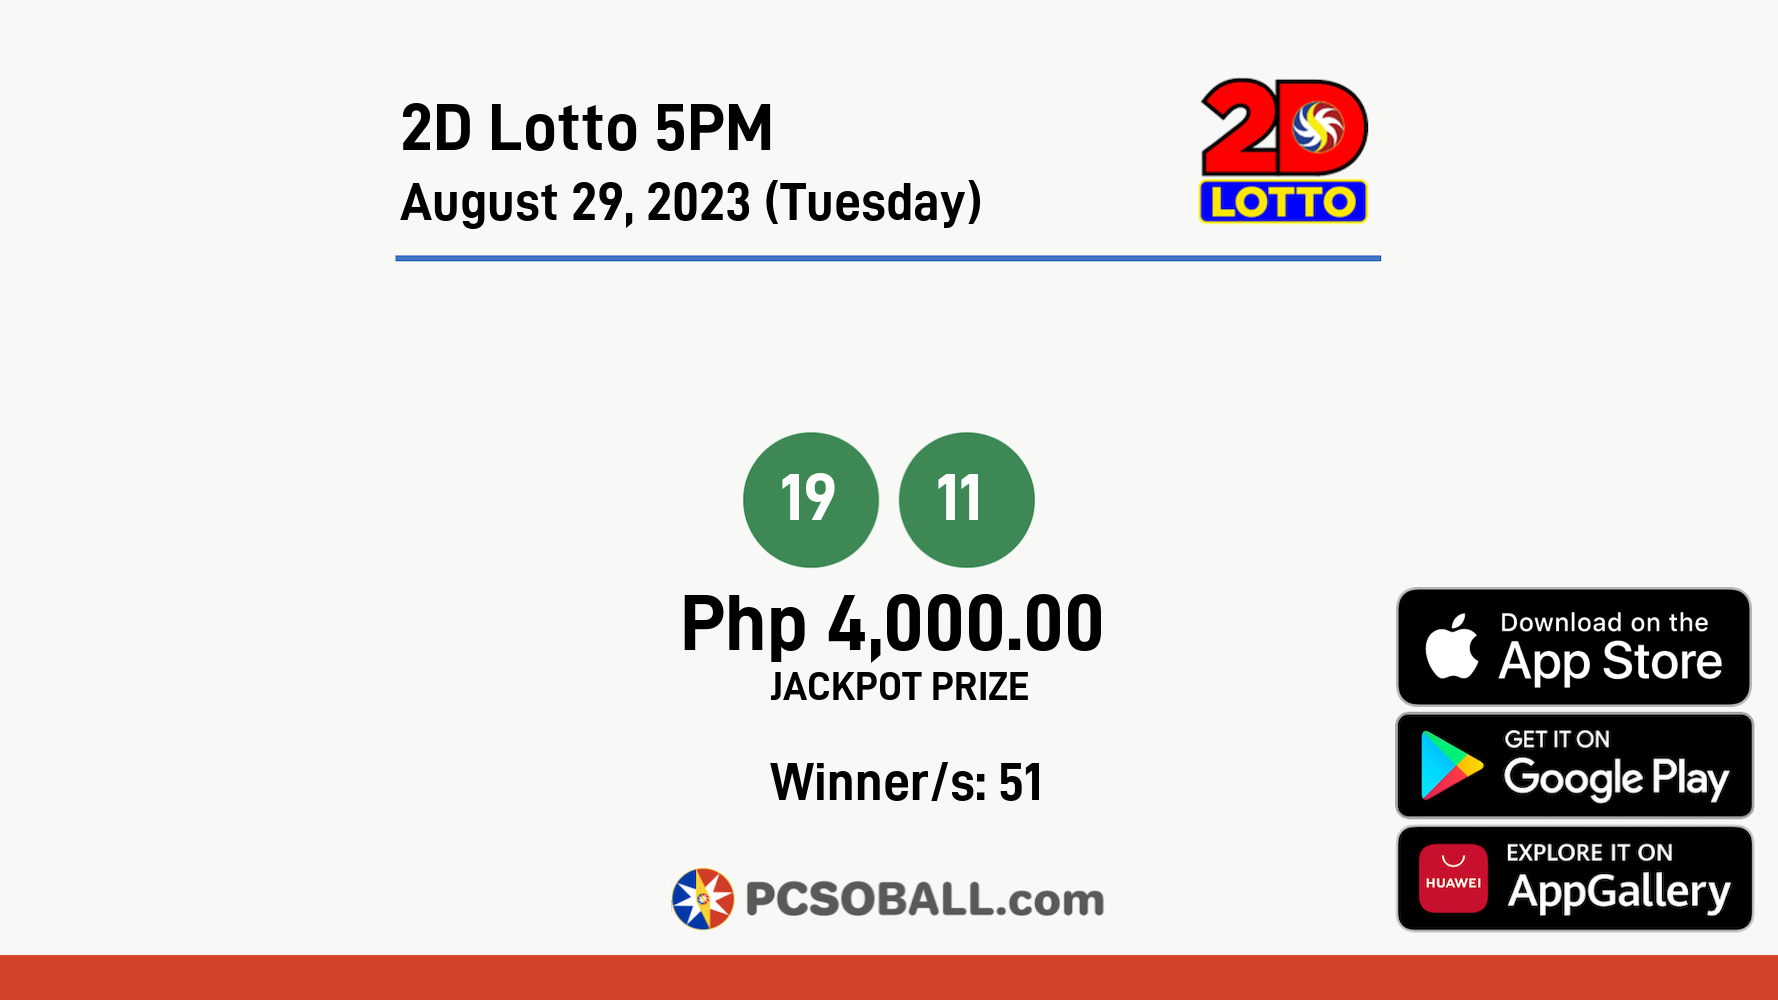 2D Lotto 5PM August 29, 2023 (Tuesday) Result